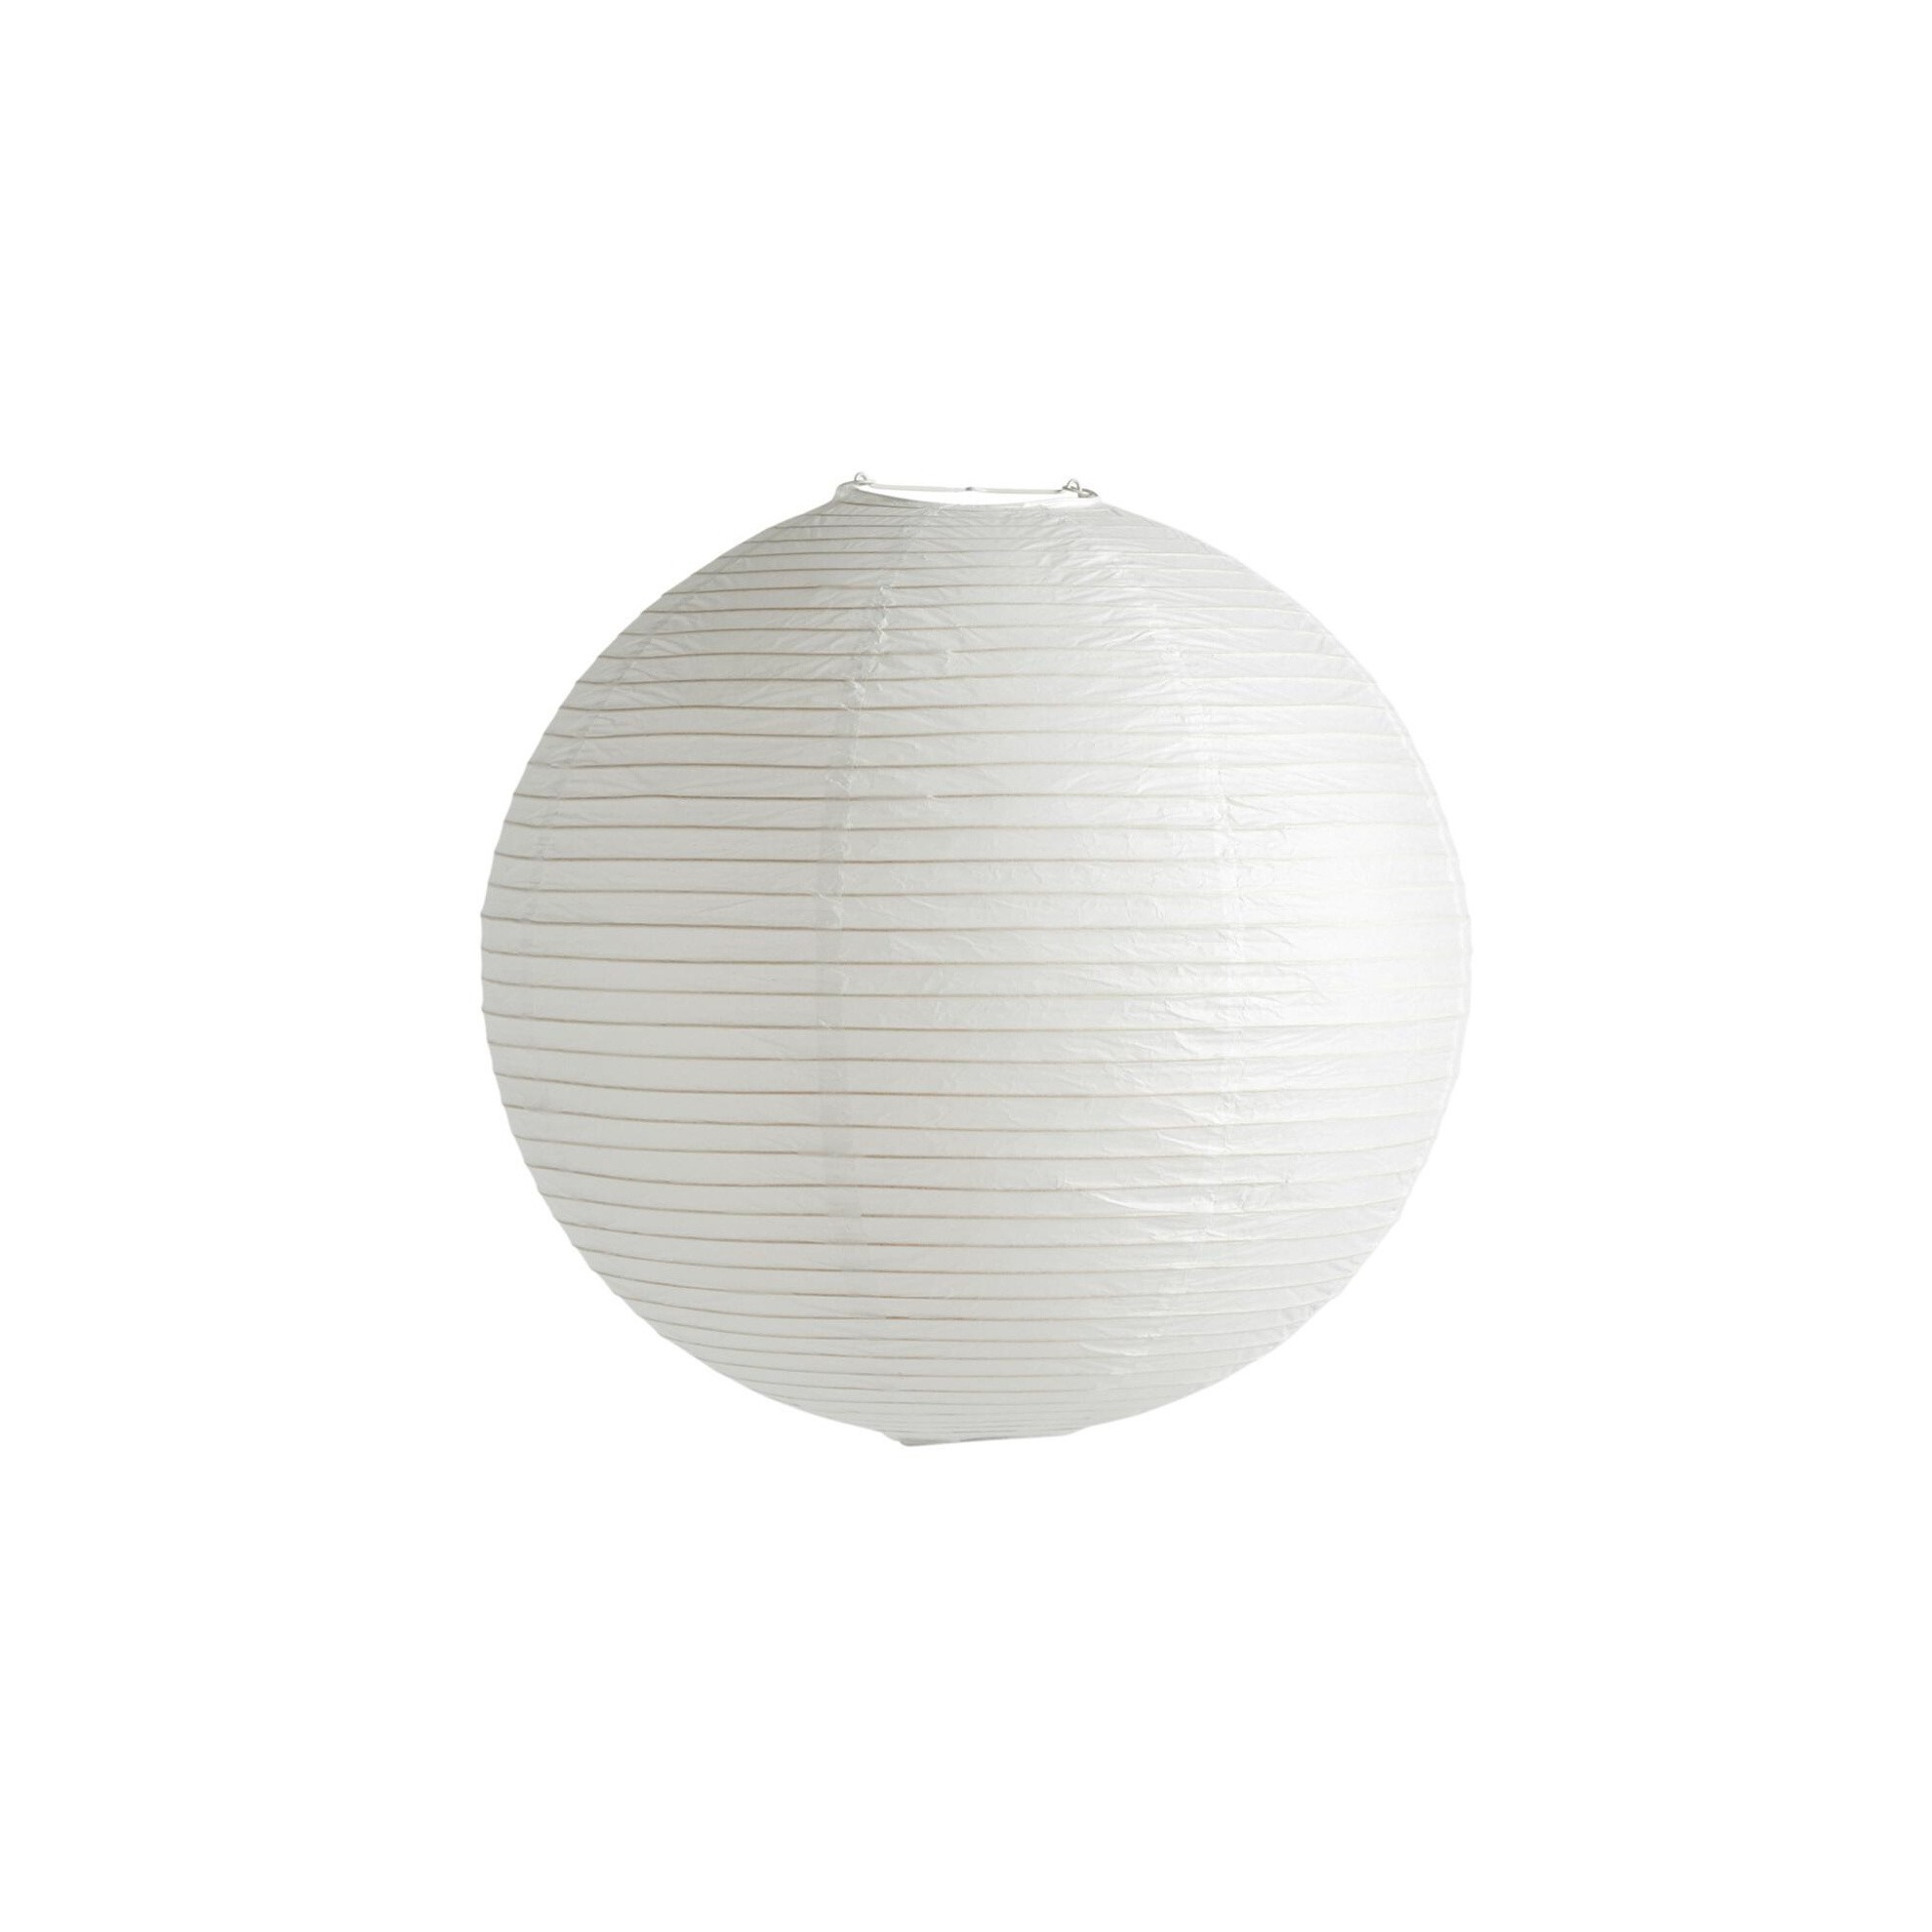 large white paper light shades